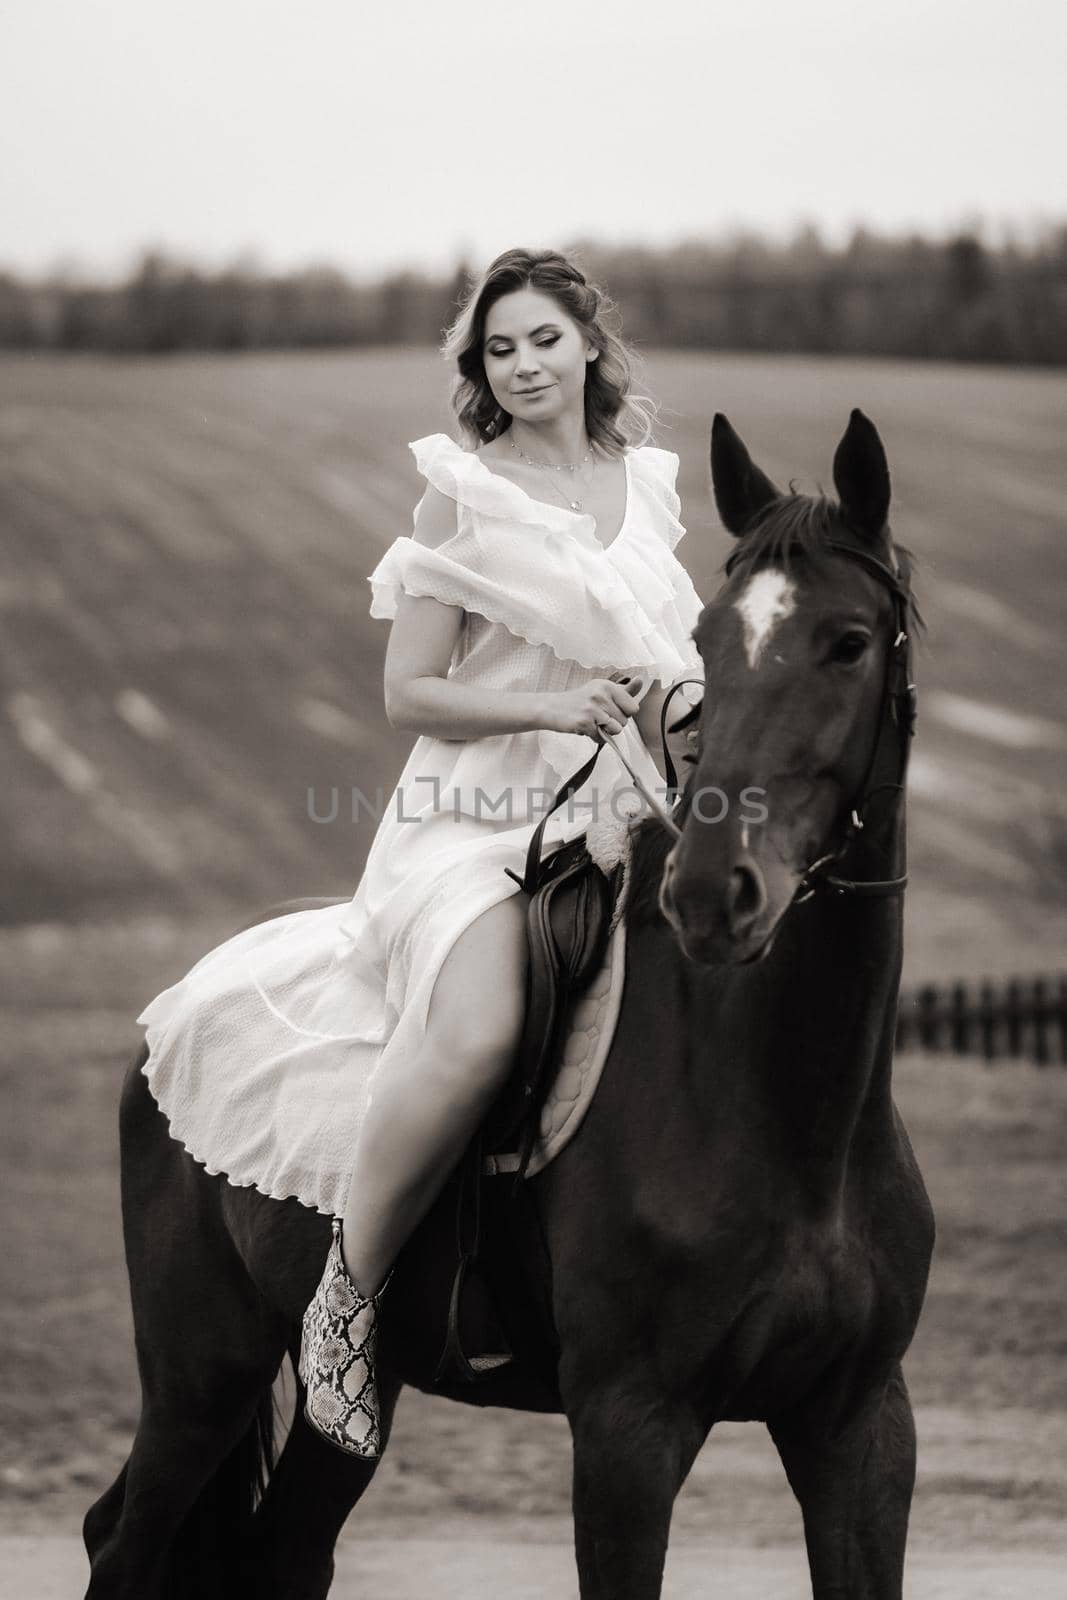 A woman in a white sundress riding a horse in a field. black and white photo.